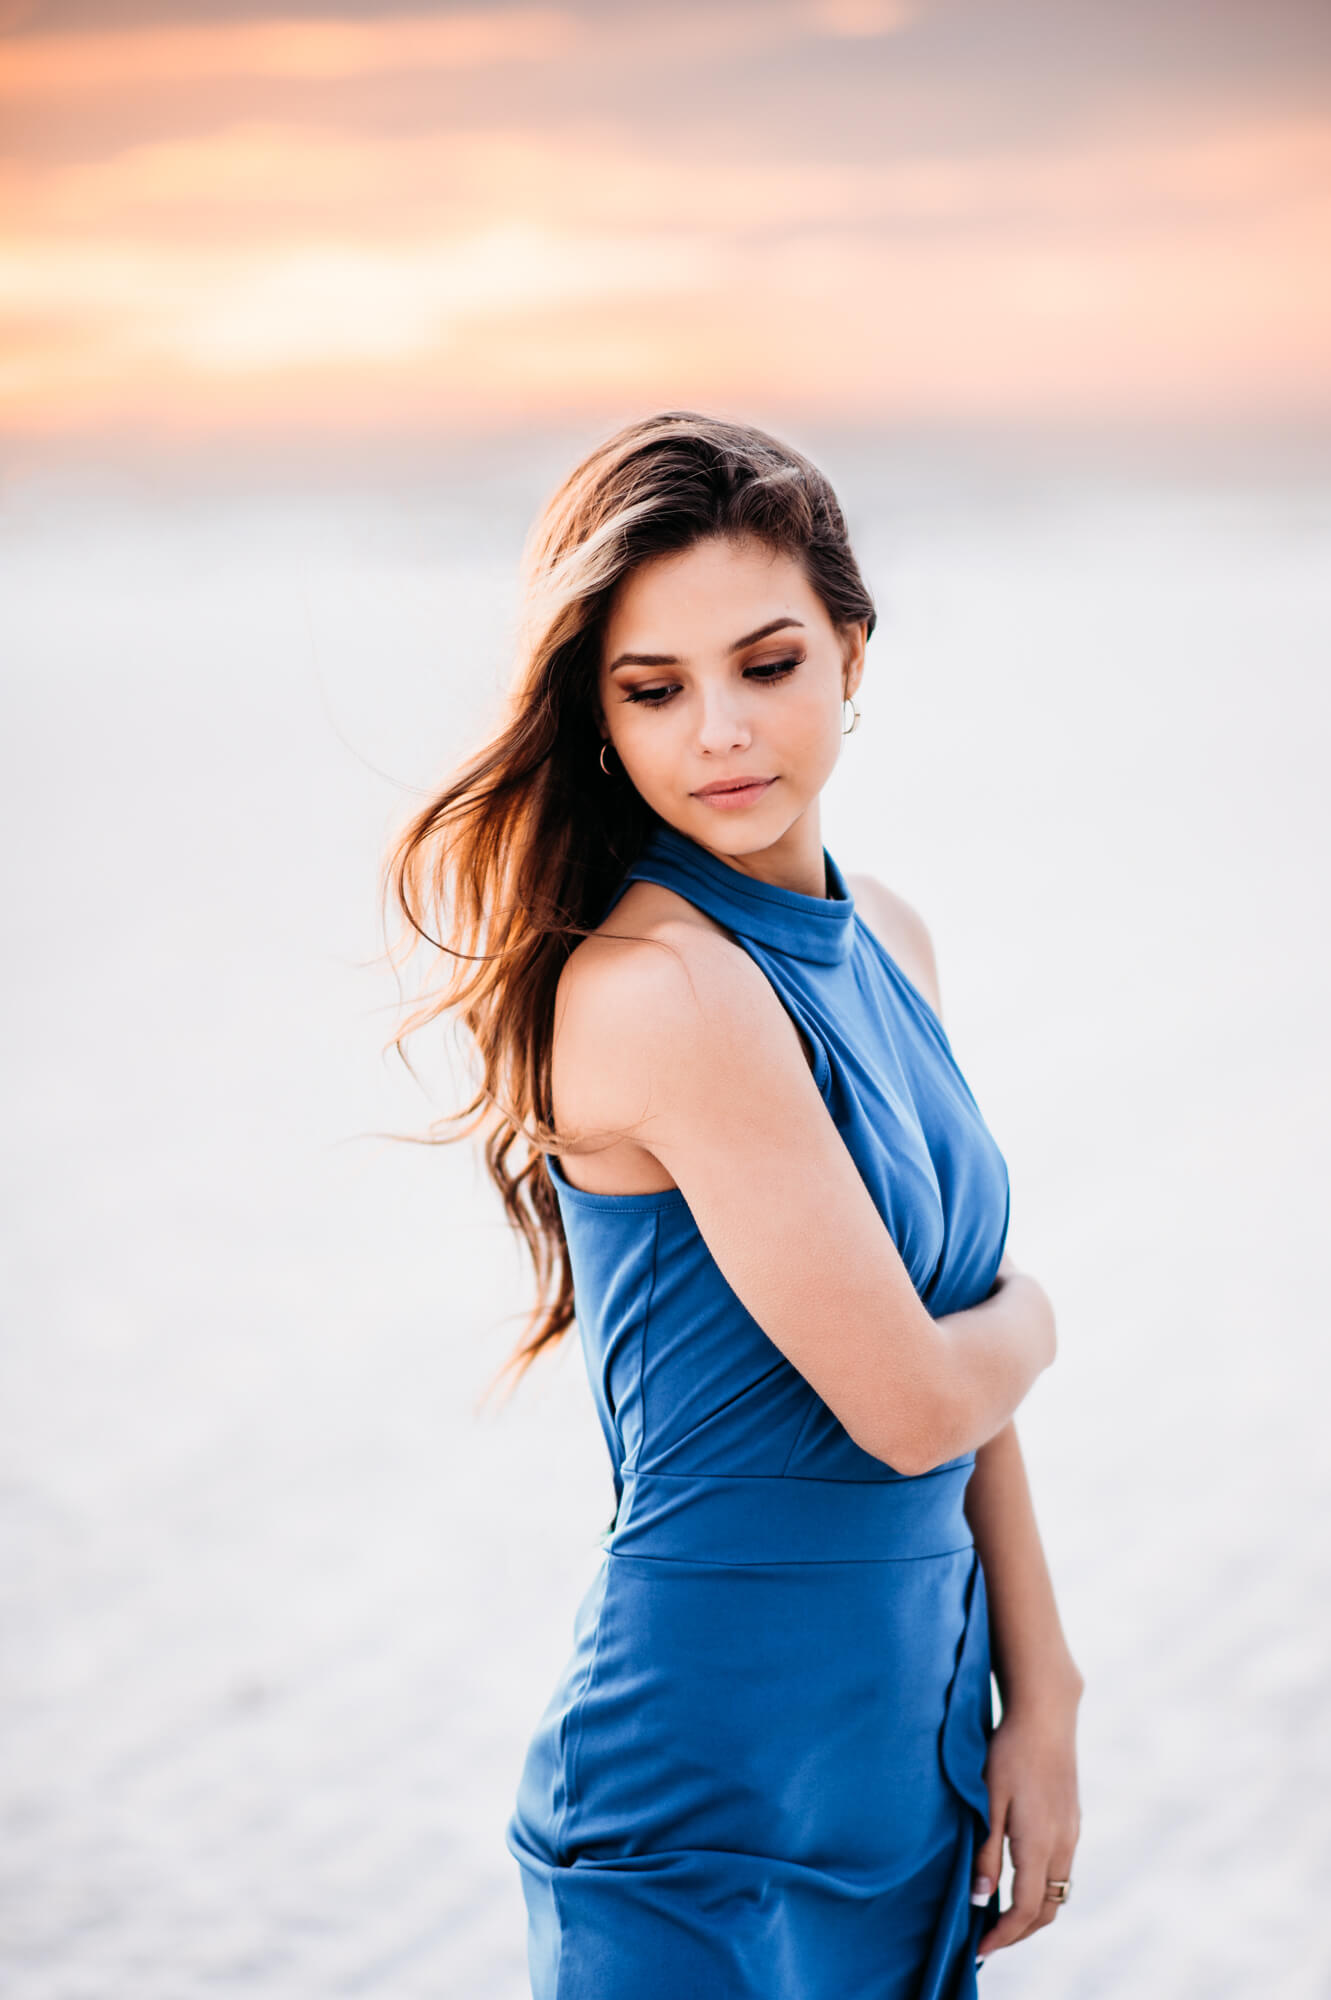 A woman in a blue dress standing on the beach at sunset during high school senior photoshoot